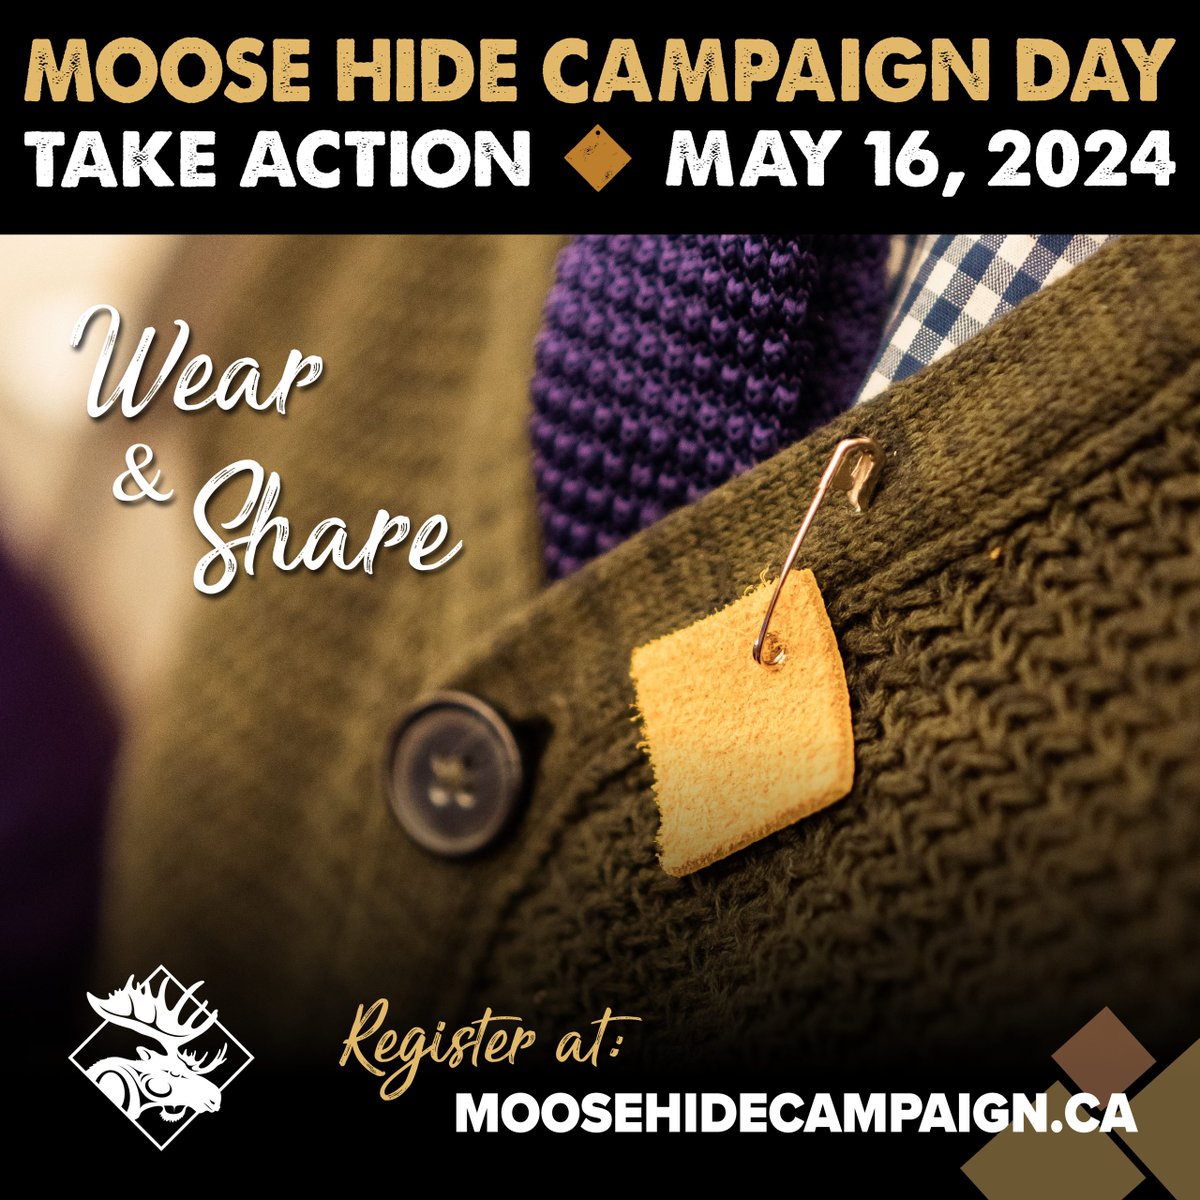 Join us on May 16 as we observe Moose Hide Campaign Day. This national campaign is an Indigenous-led grassroots movement to end violence against women.
Pins can be picked up from Sturgeon County Centre and FCSS Office in Morinville

#MooseHideCampaign #SturgeonCounty #EndViolence